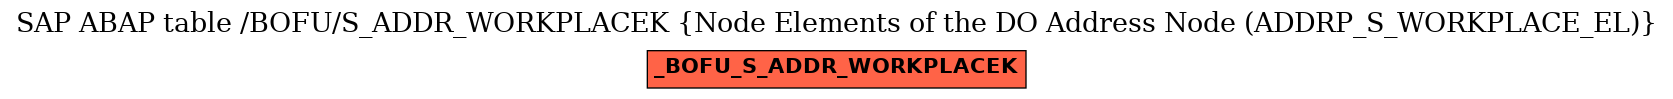 E-R Diagram for table /BOFU/S_ADDR_WORKPLACEK (Node Elements of the DO Address Node (ADDRP_S_WORKPLACE_EL))